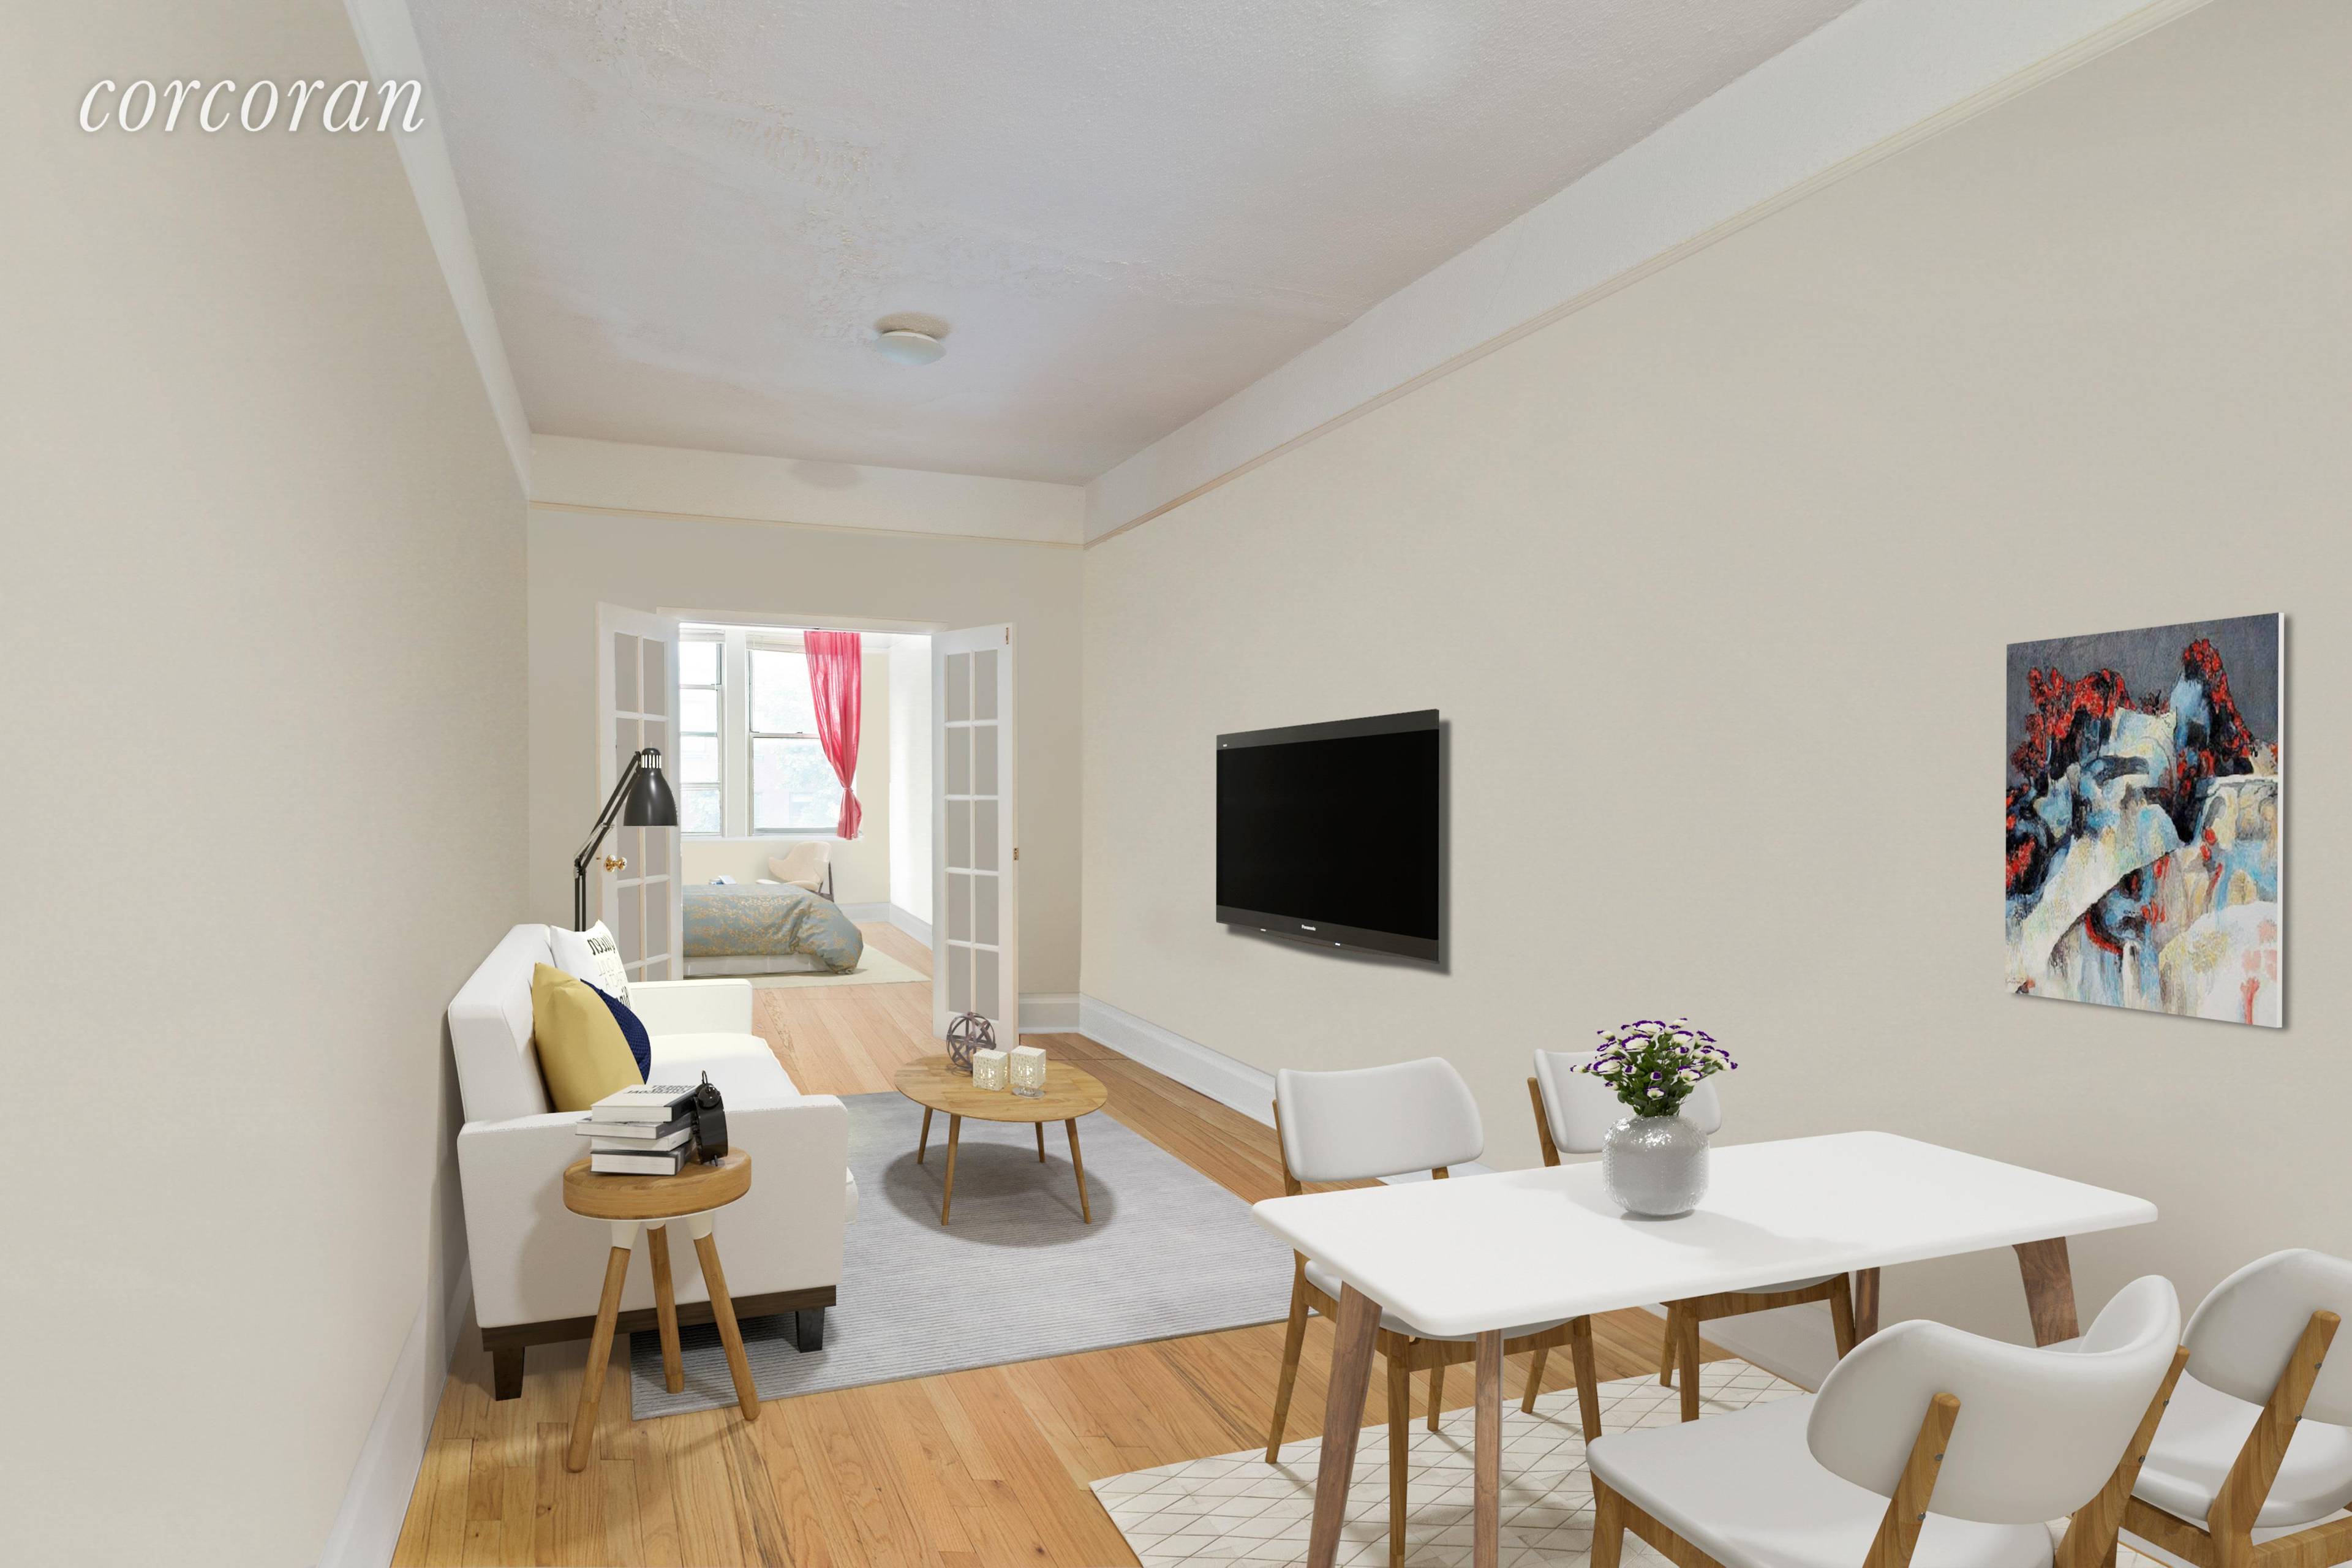 Look No Further ! This flexible 2 bedroom apartment is all about charm and convince.